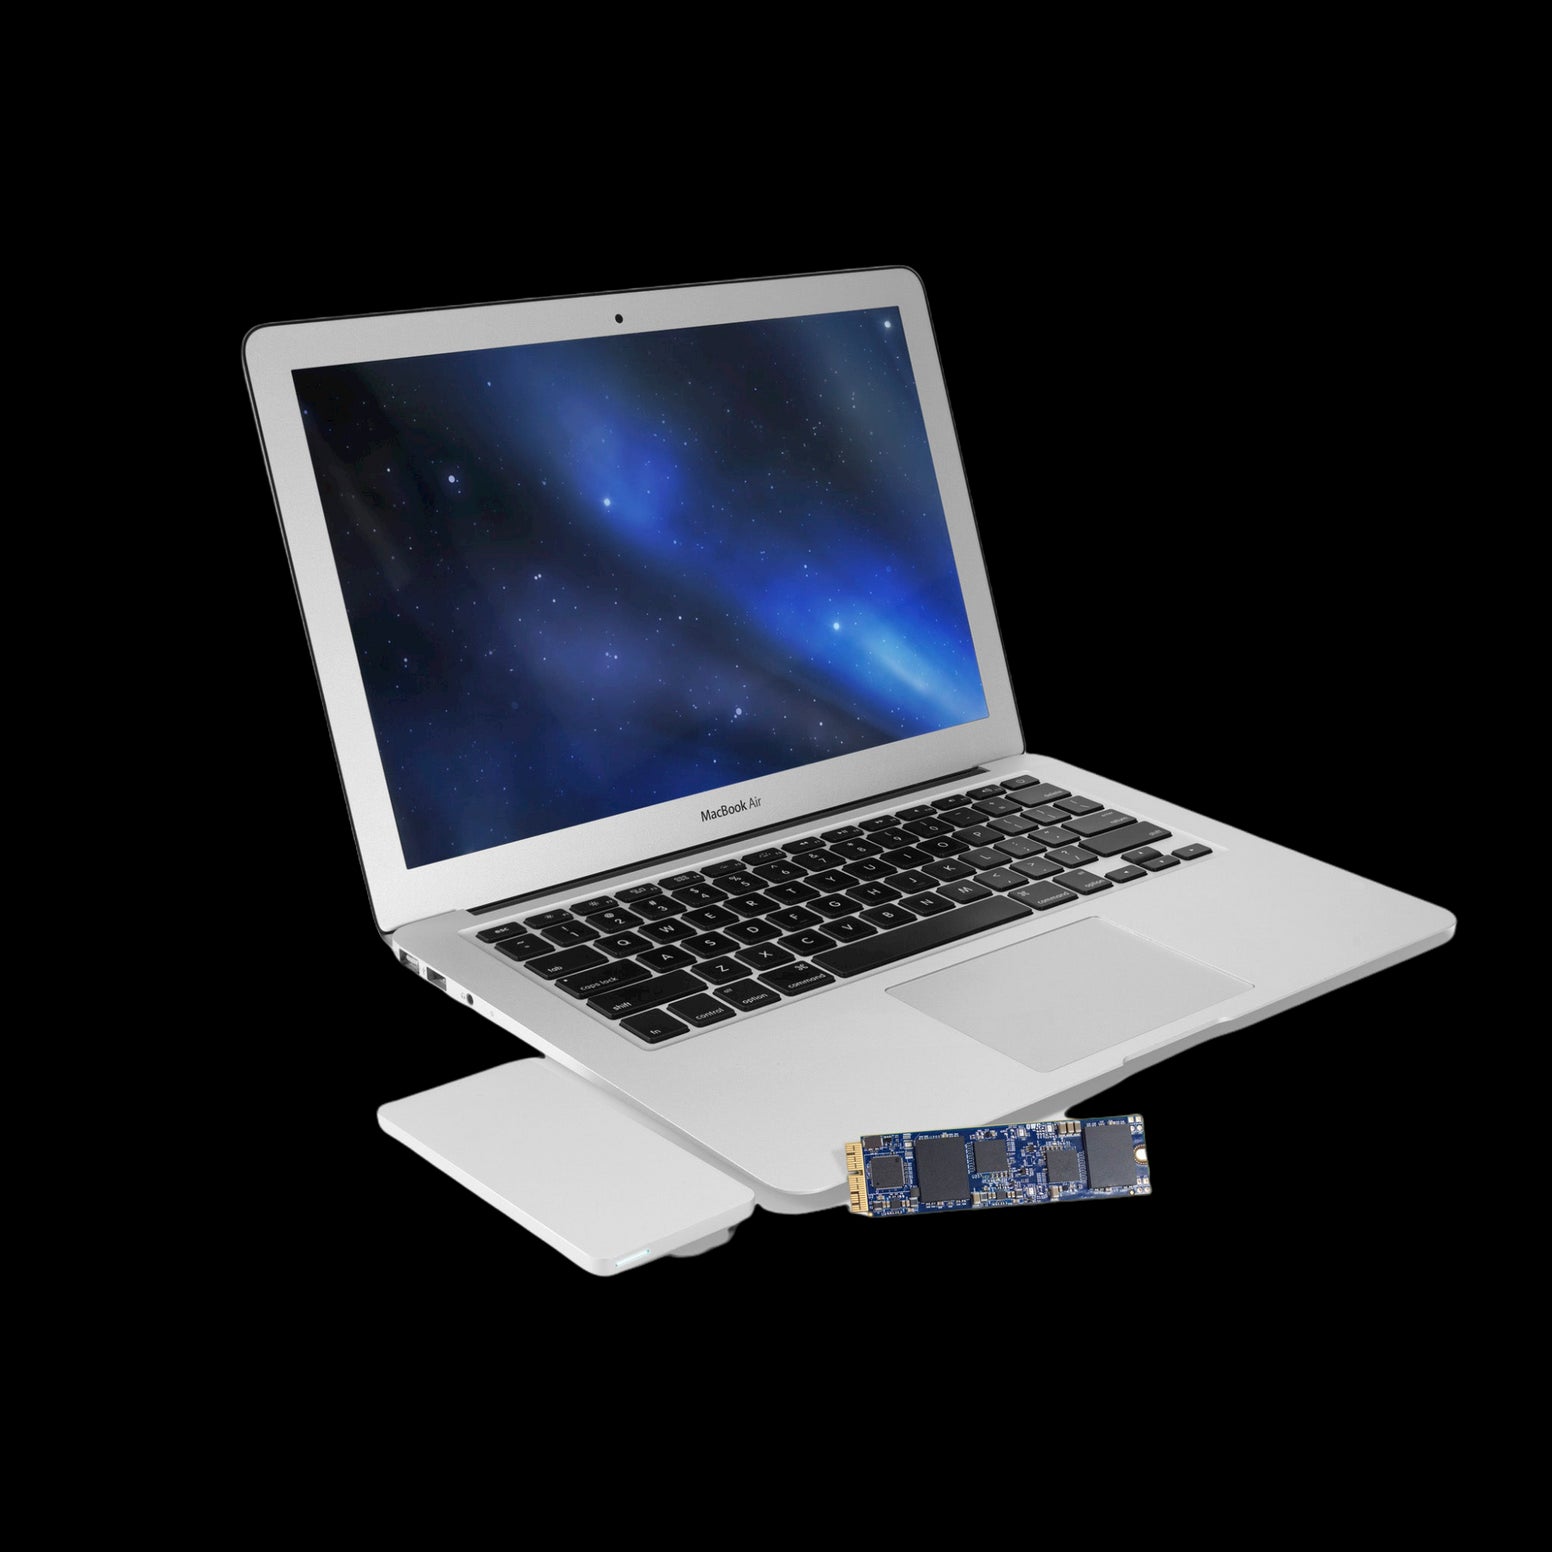 OWC 500GB Aura Pro 6G SSD with Upgrade Kit for MacBook 2012 Air